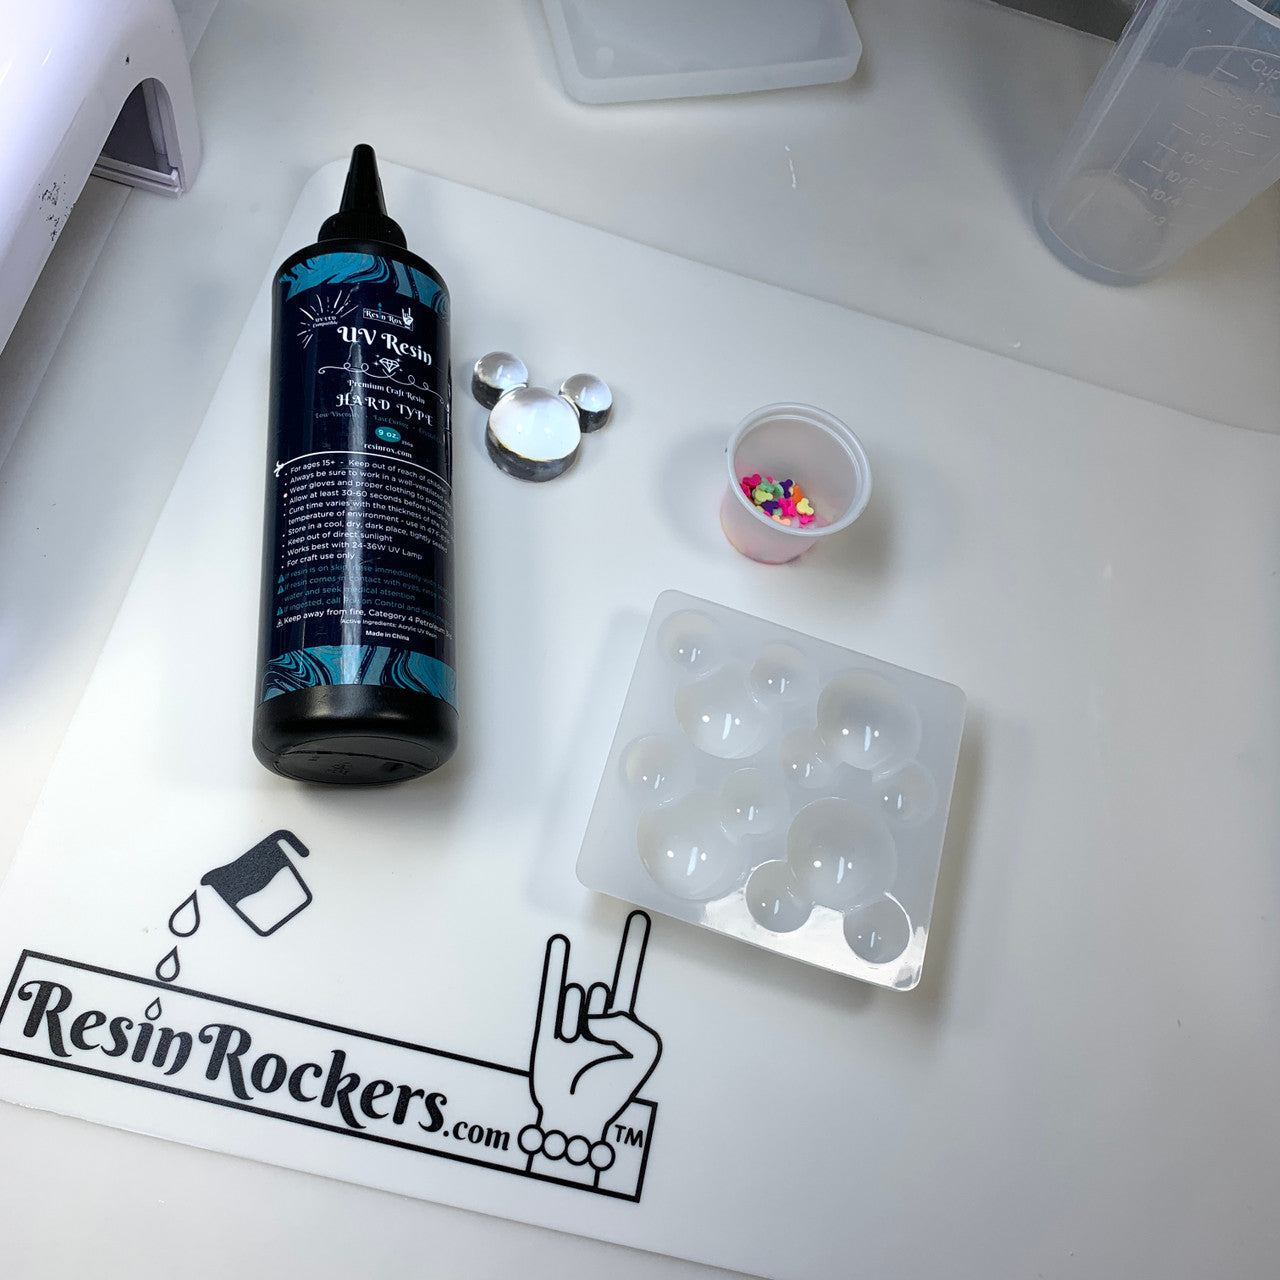 Resin Rockers Official White Workspace Mat